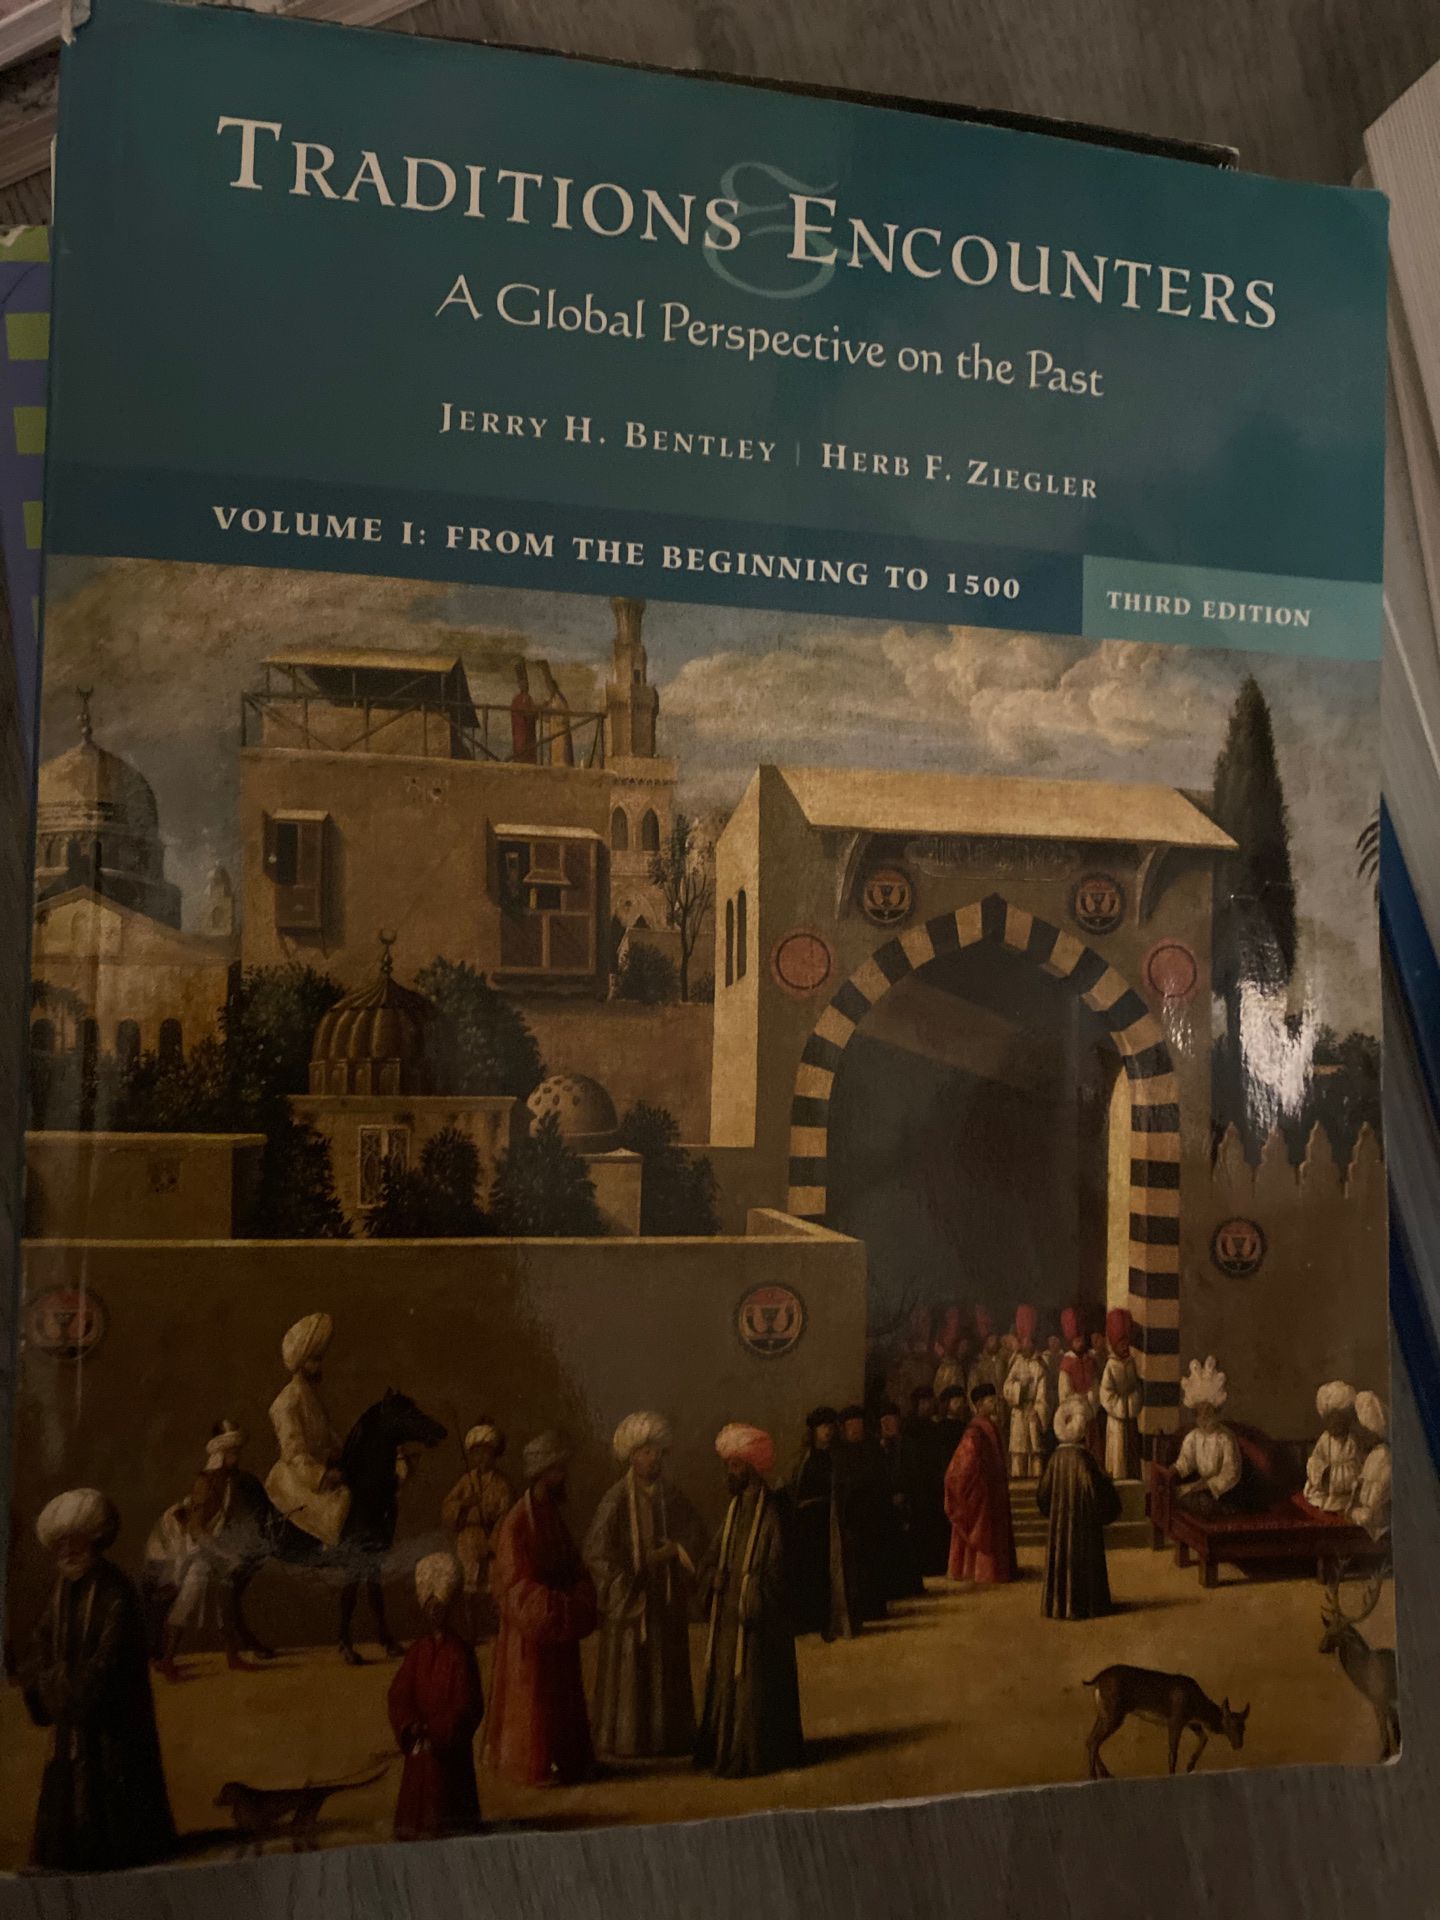 Traditions & Encounters: A Global Perspective on the Past Bentley Ziegler Volume 1 third editon